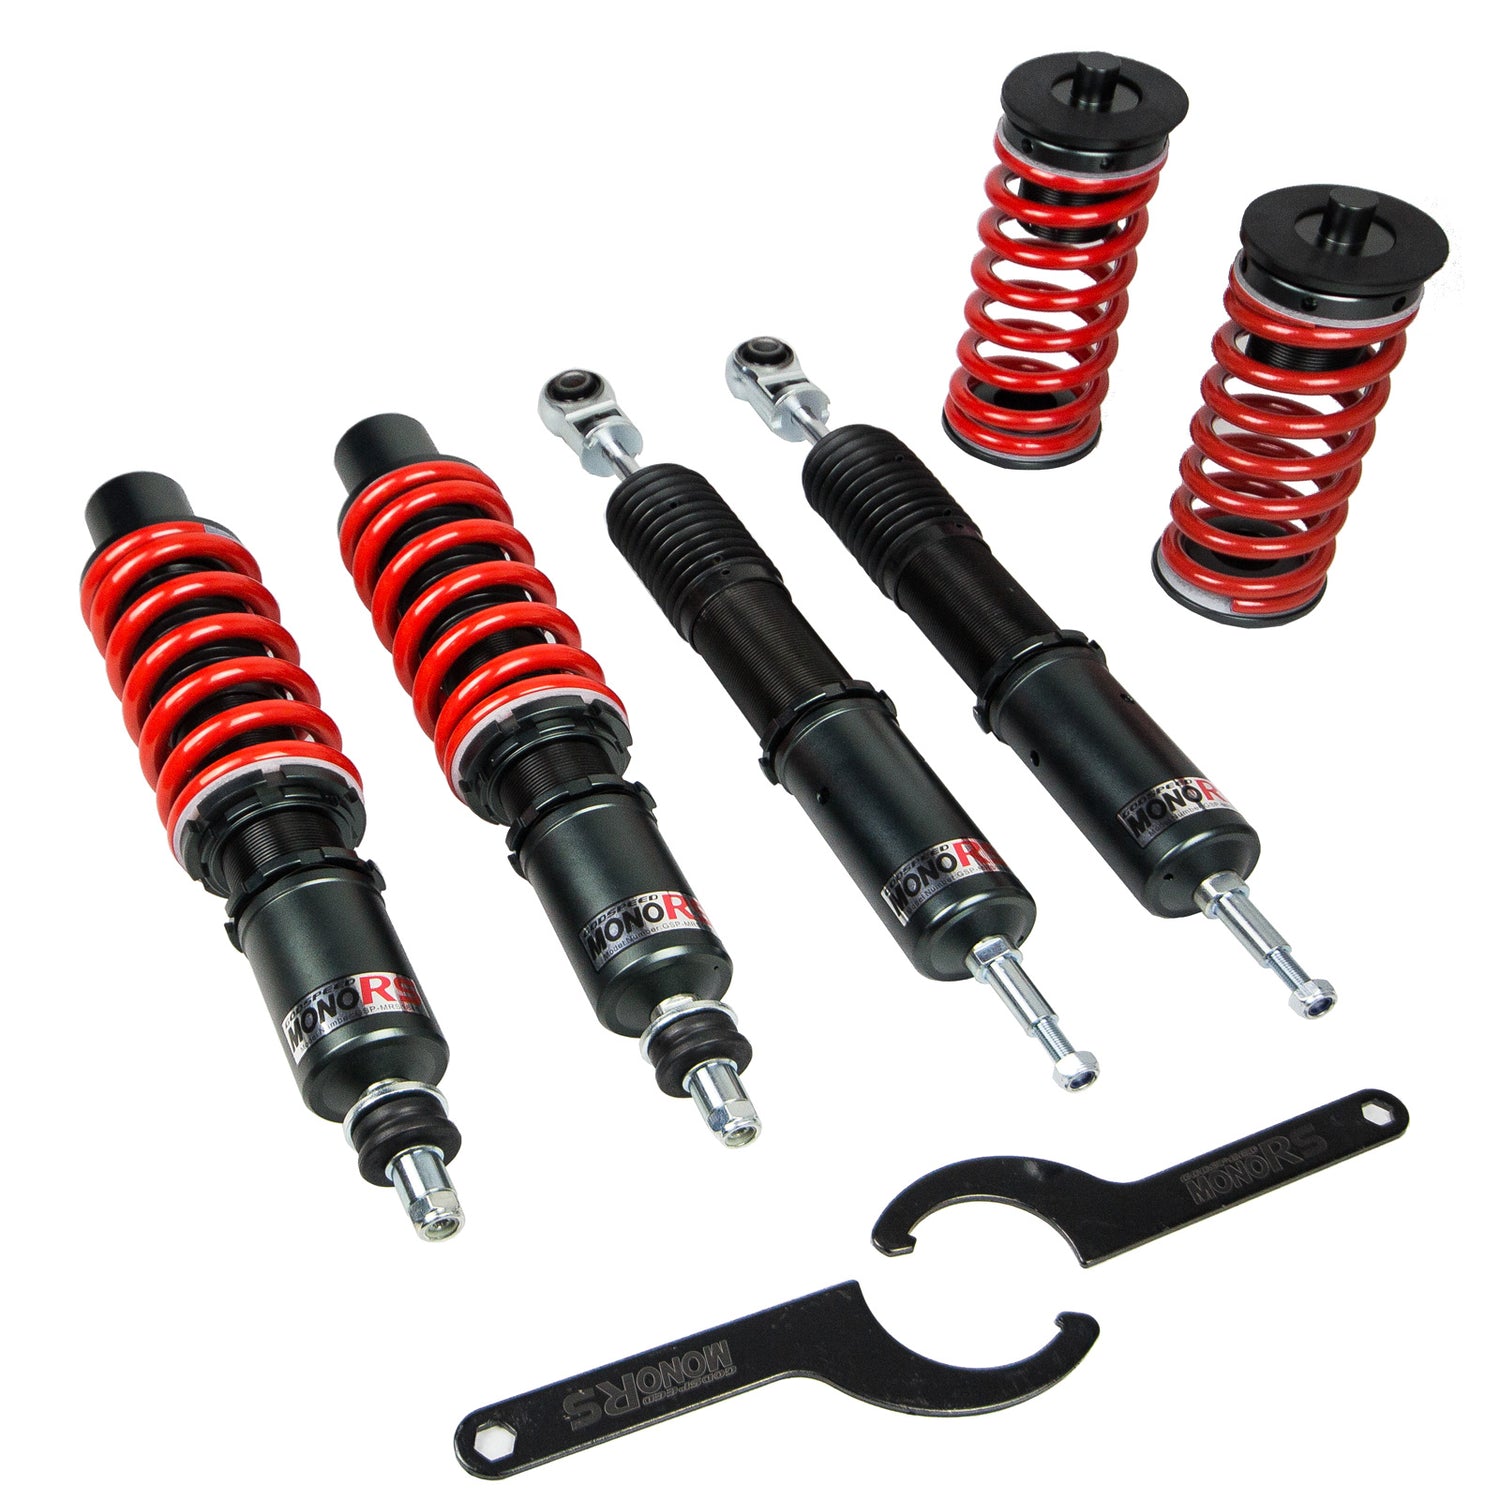 Godspeed MRS1840-A MonoRS Coilover Lowering Kit, 32 Damping Adjustment, Ride Height Adjustable